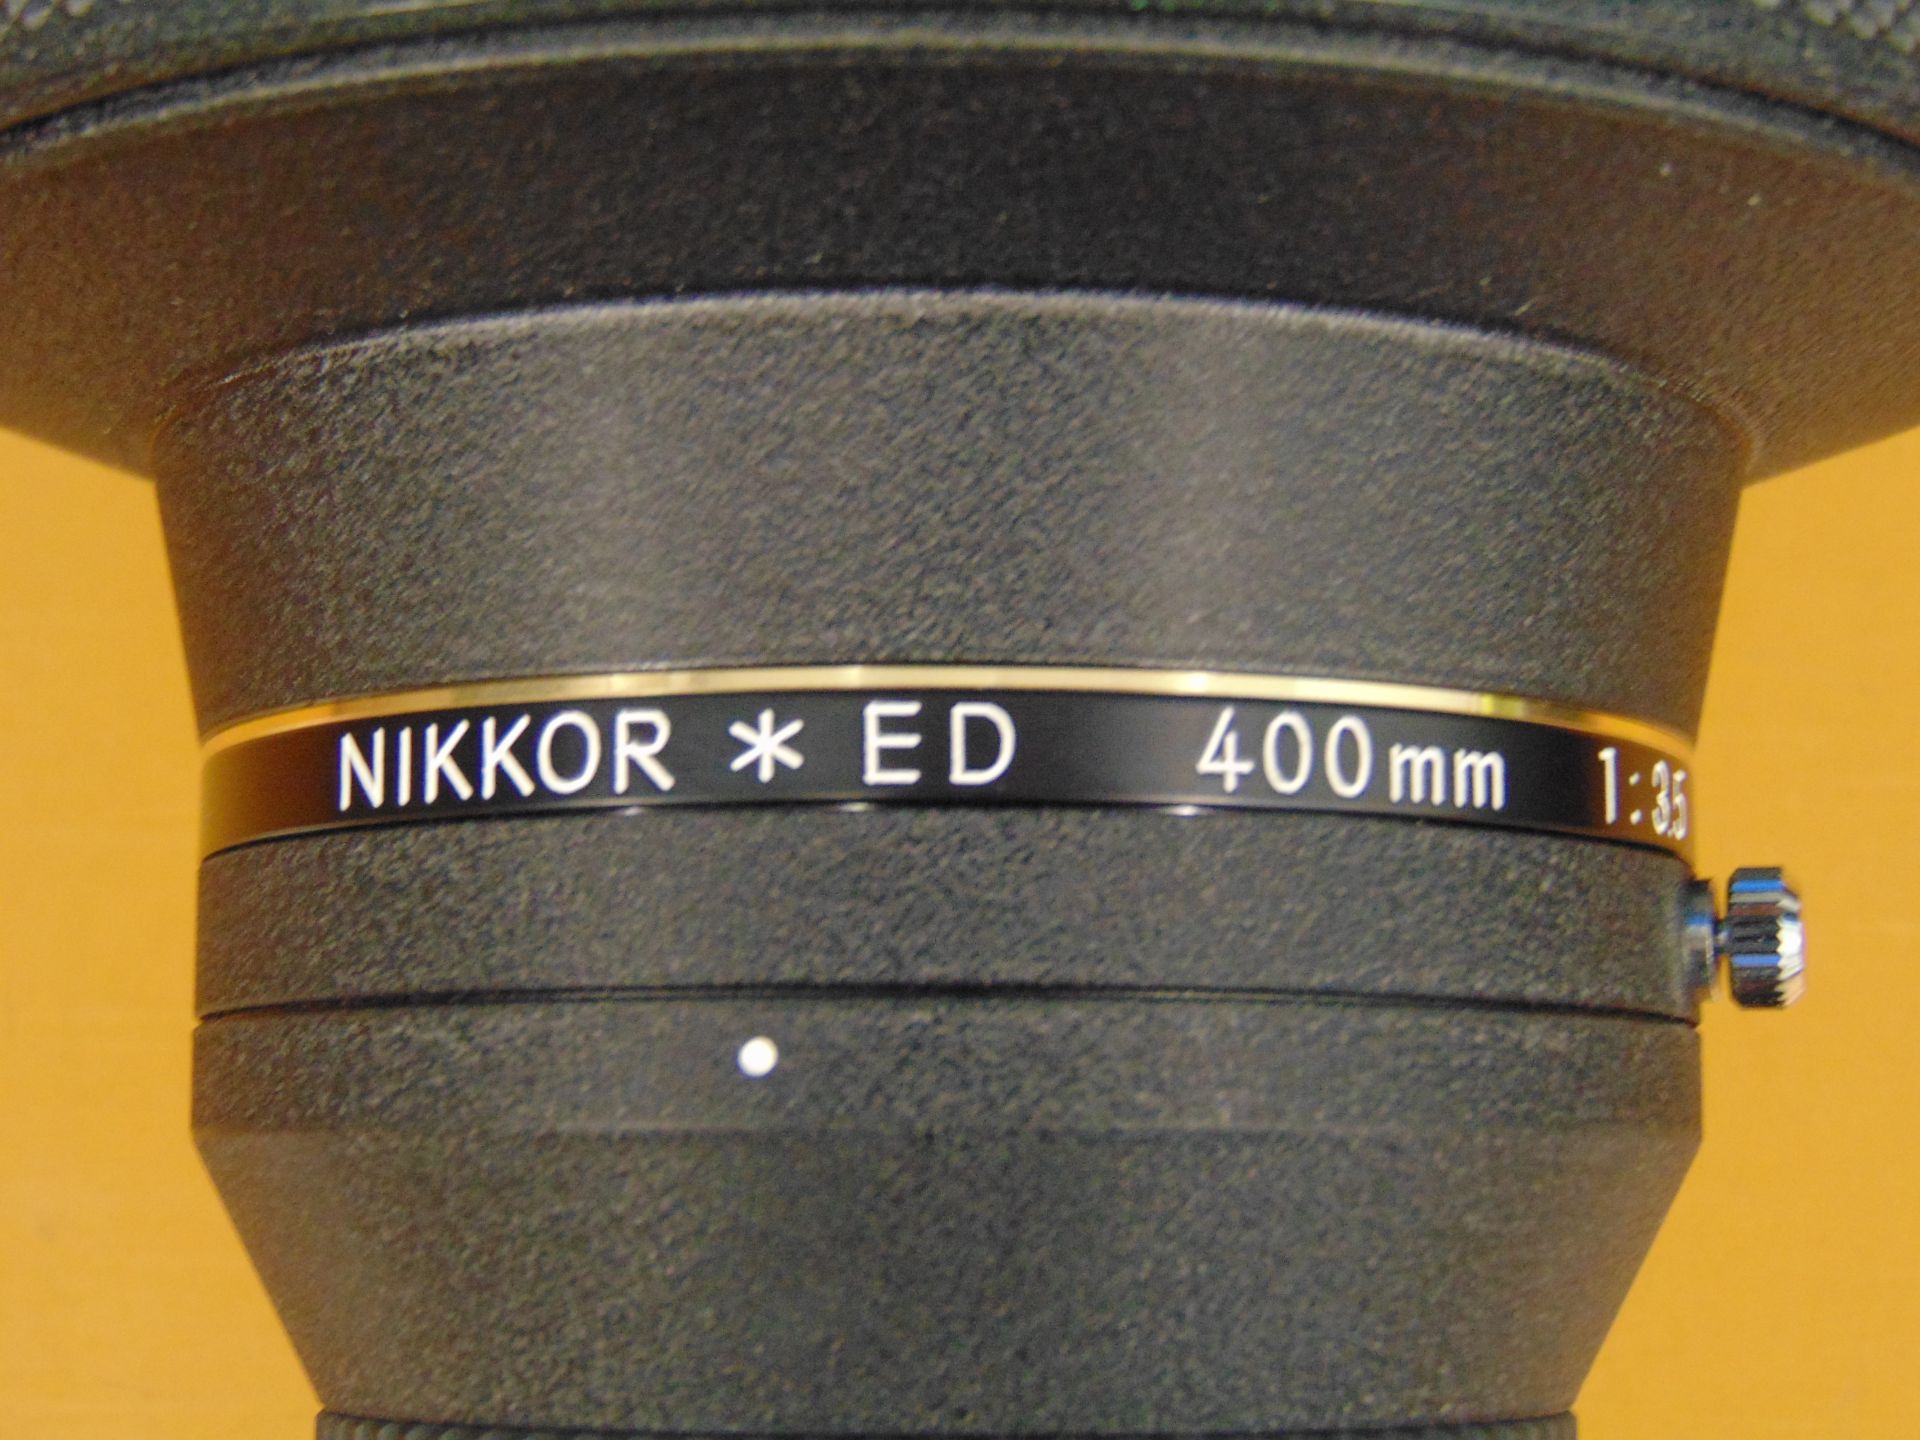 Nikon Nikkor ED 400mm 1:3.5 Lense with Leather Carry Case - Image 5 of 11